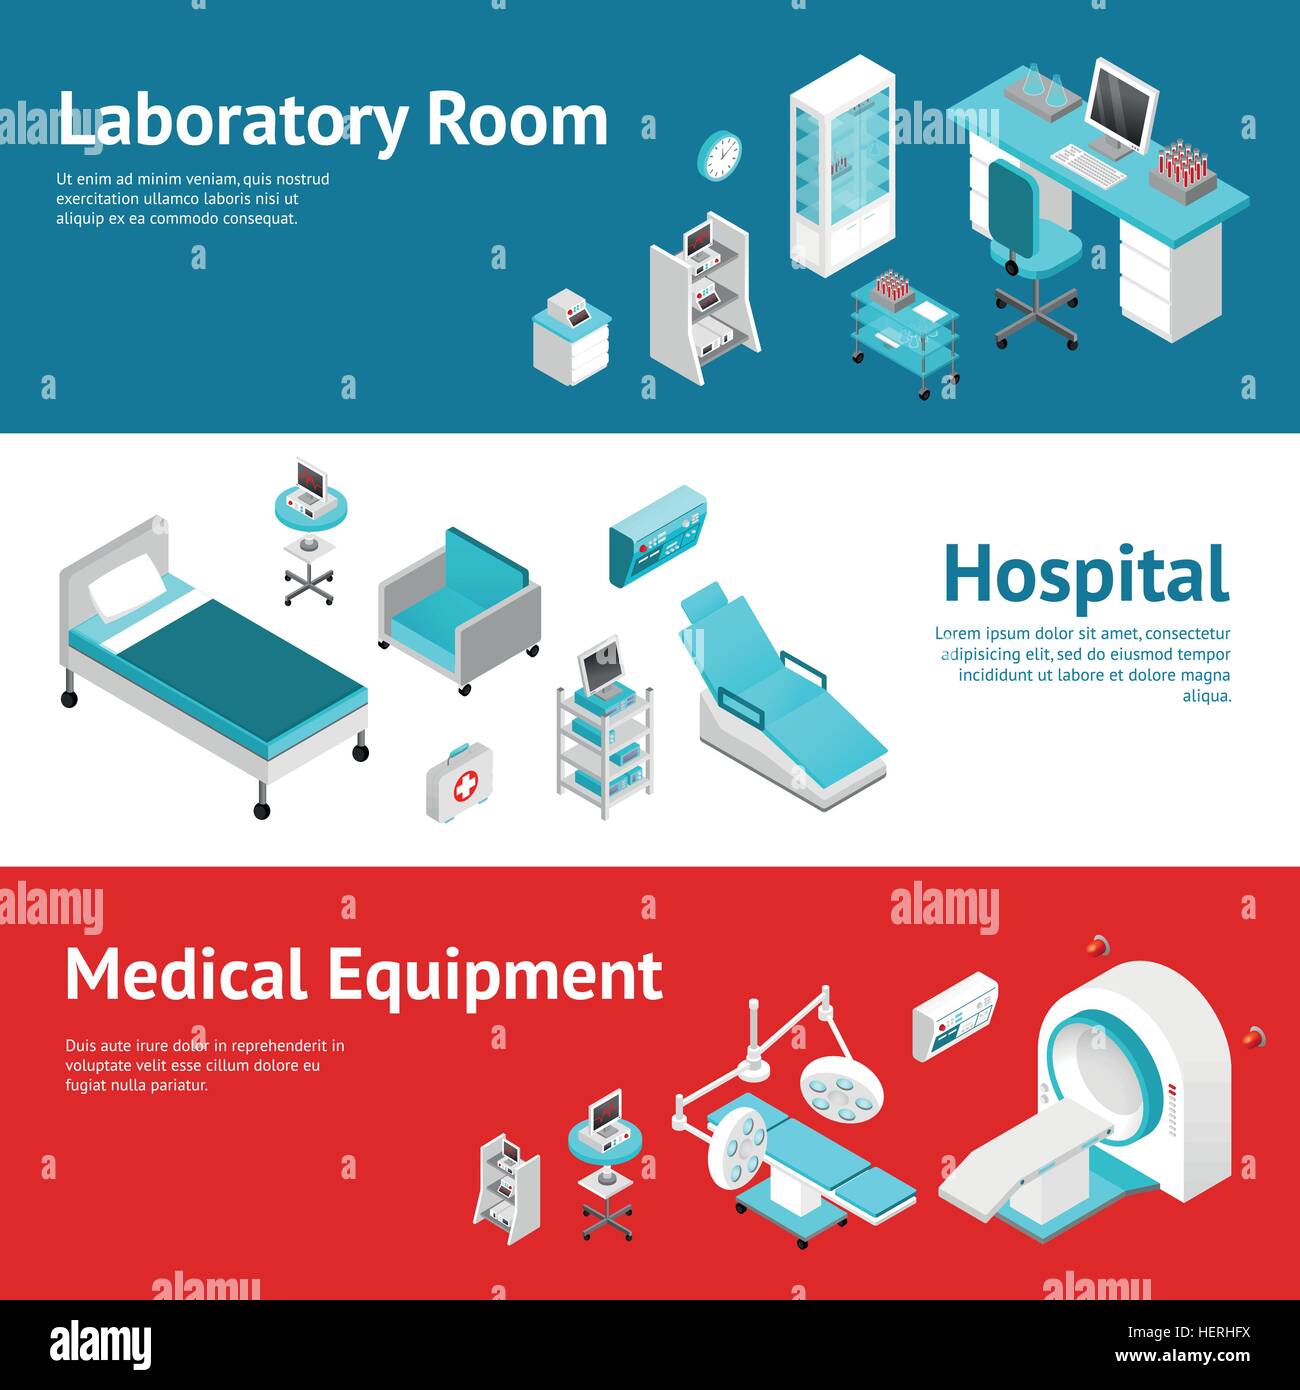 Hospital Medical Equipment Flat Banners Set . Hospital medical laboratory equipment 3 horizontal banners set with text and Stock Vector